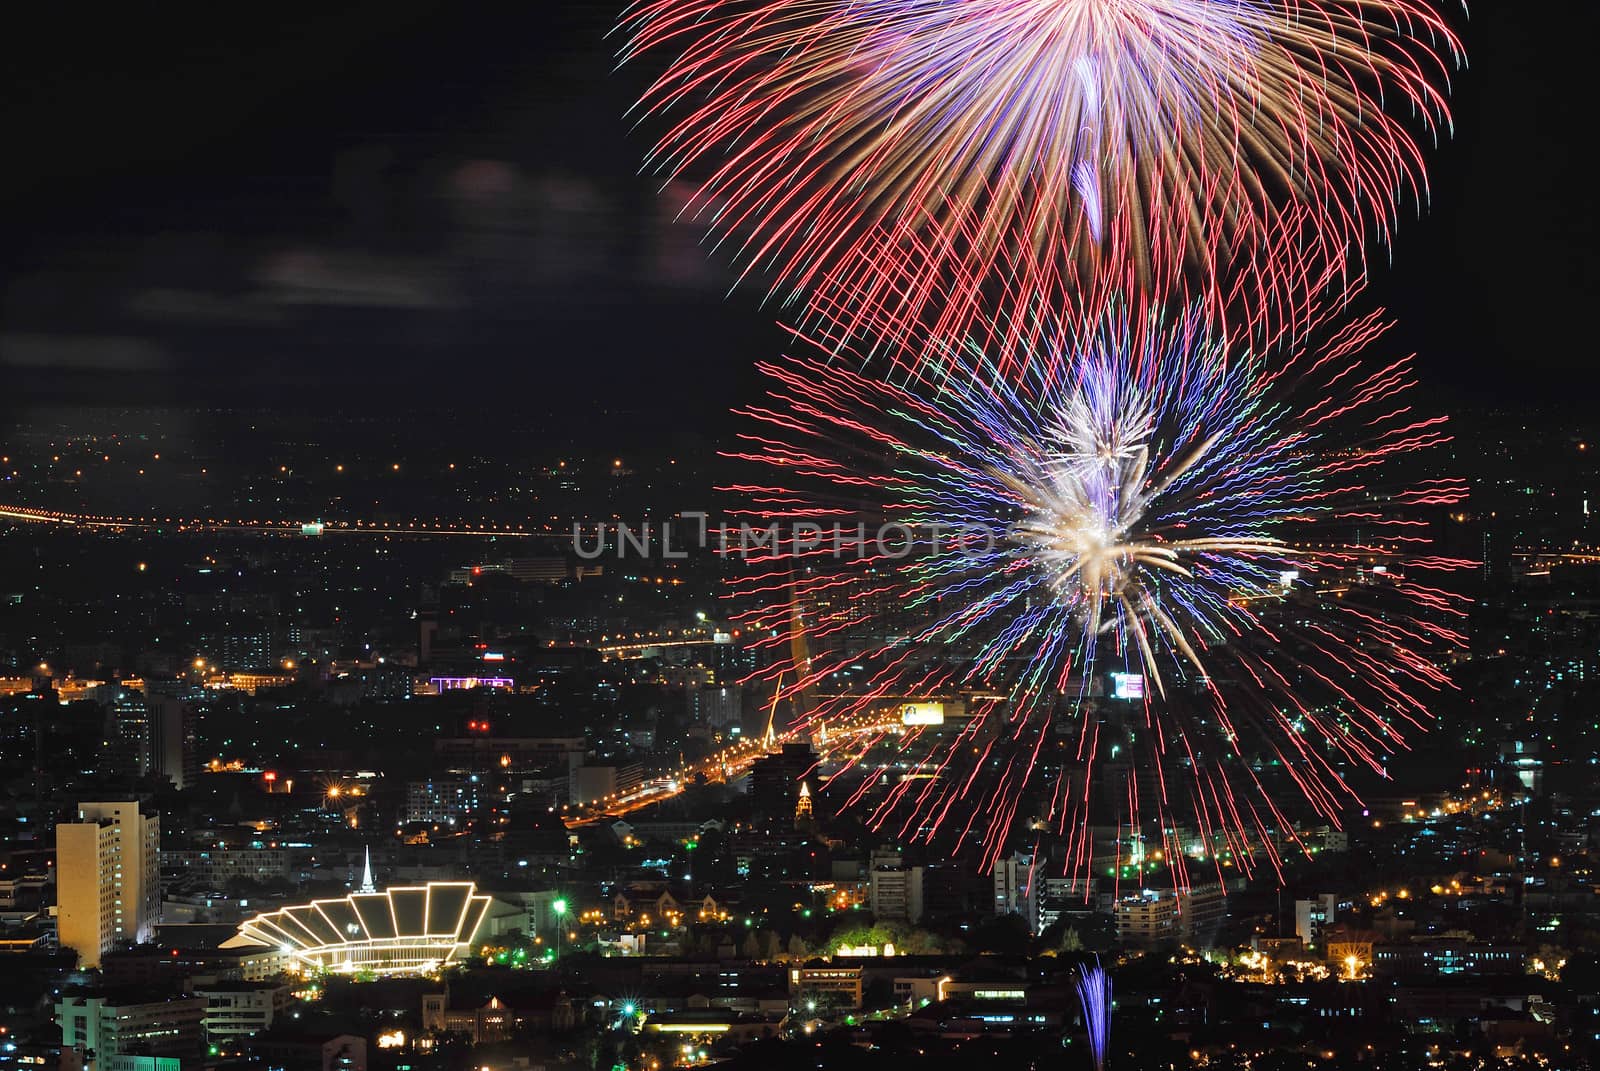 firework over Chaophraya river Bangkok on Father's day,Bangkok by think4photop